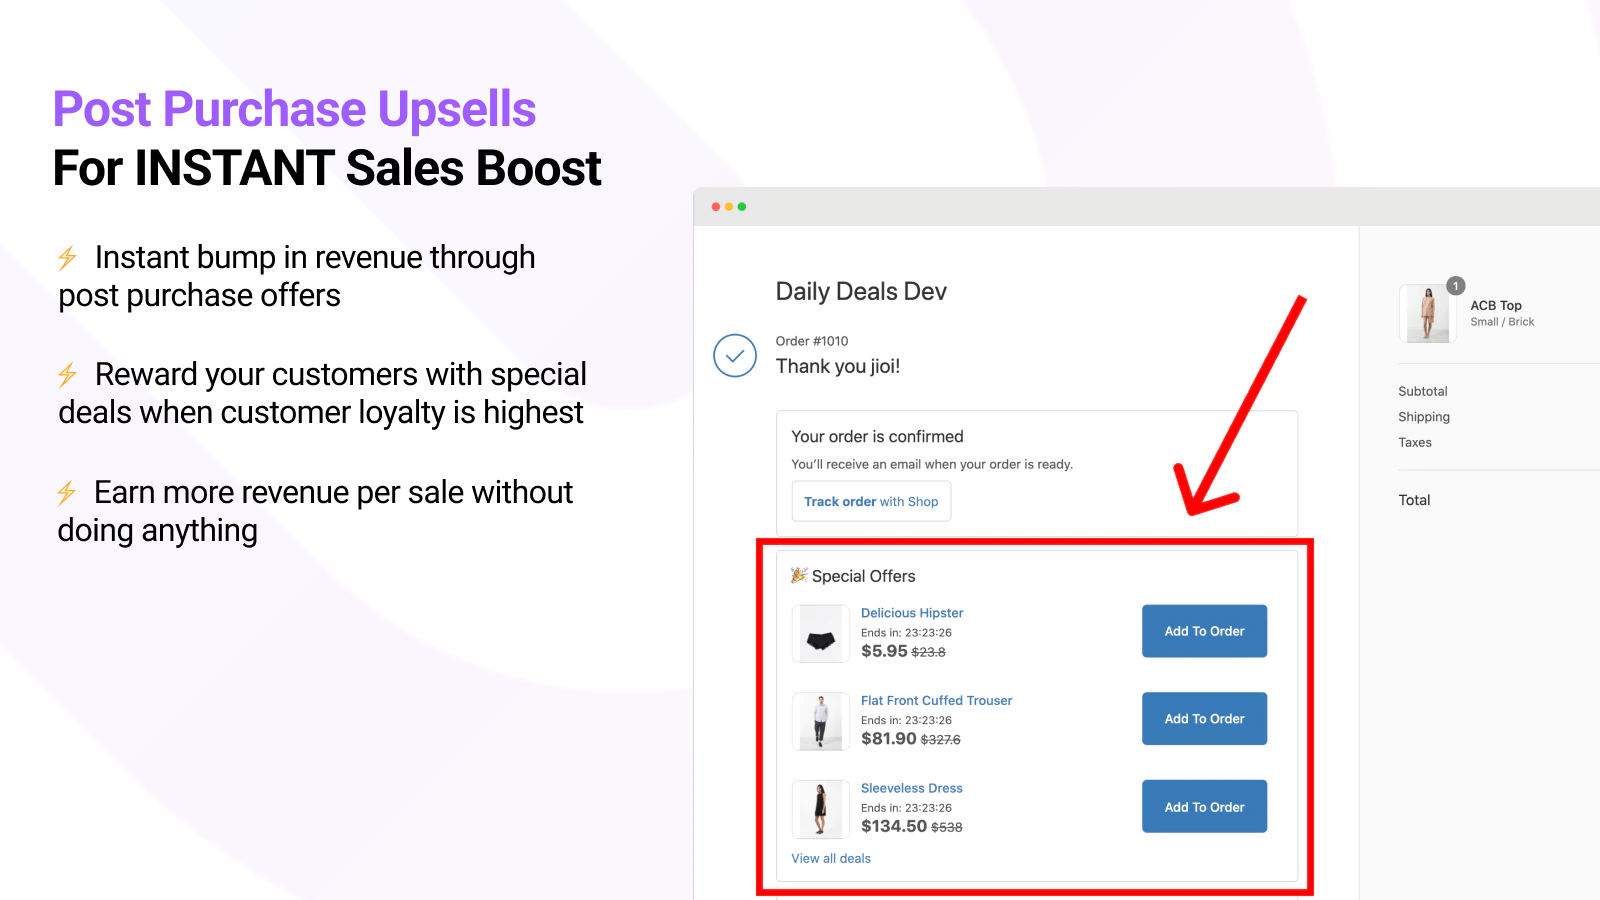 Post Purchase Upsells for INSTANT salgs boost